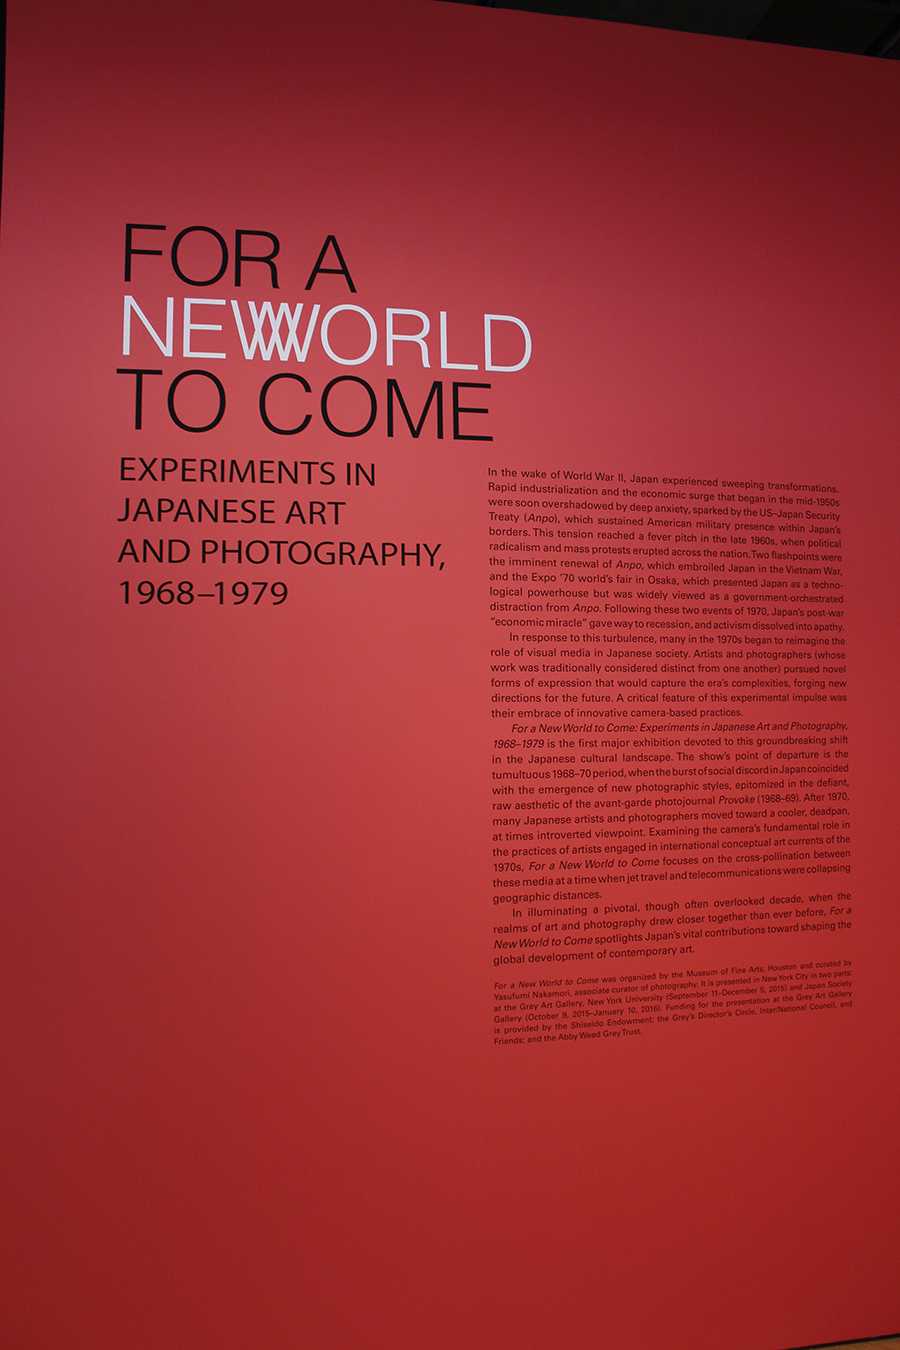 Grey+Art+Gallery+houses+post-WWII+Japan+photography